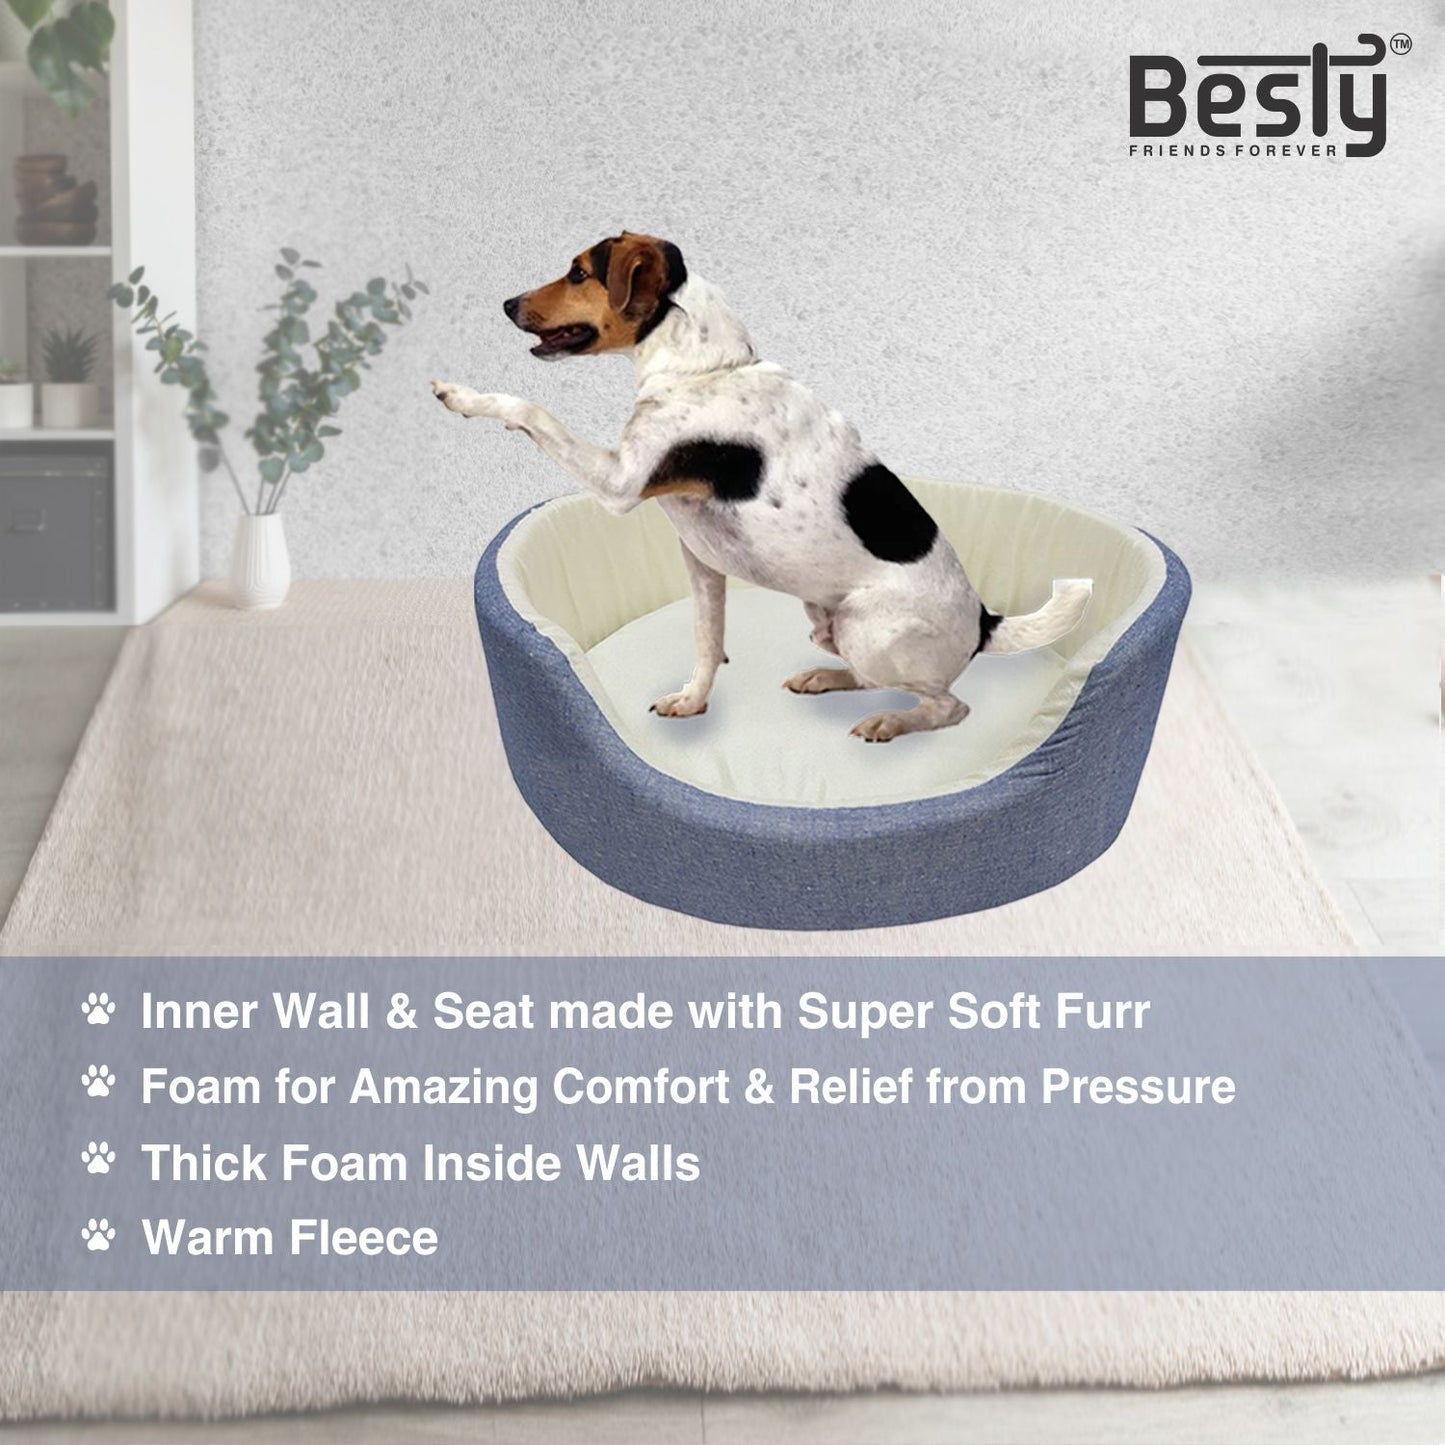 Besty Fox Style Fleece Bed Oval Shape made of Cotton Chambray (Export Quality) Bed for Dog/Cat (Medium, Light Blue)